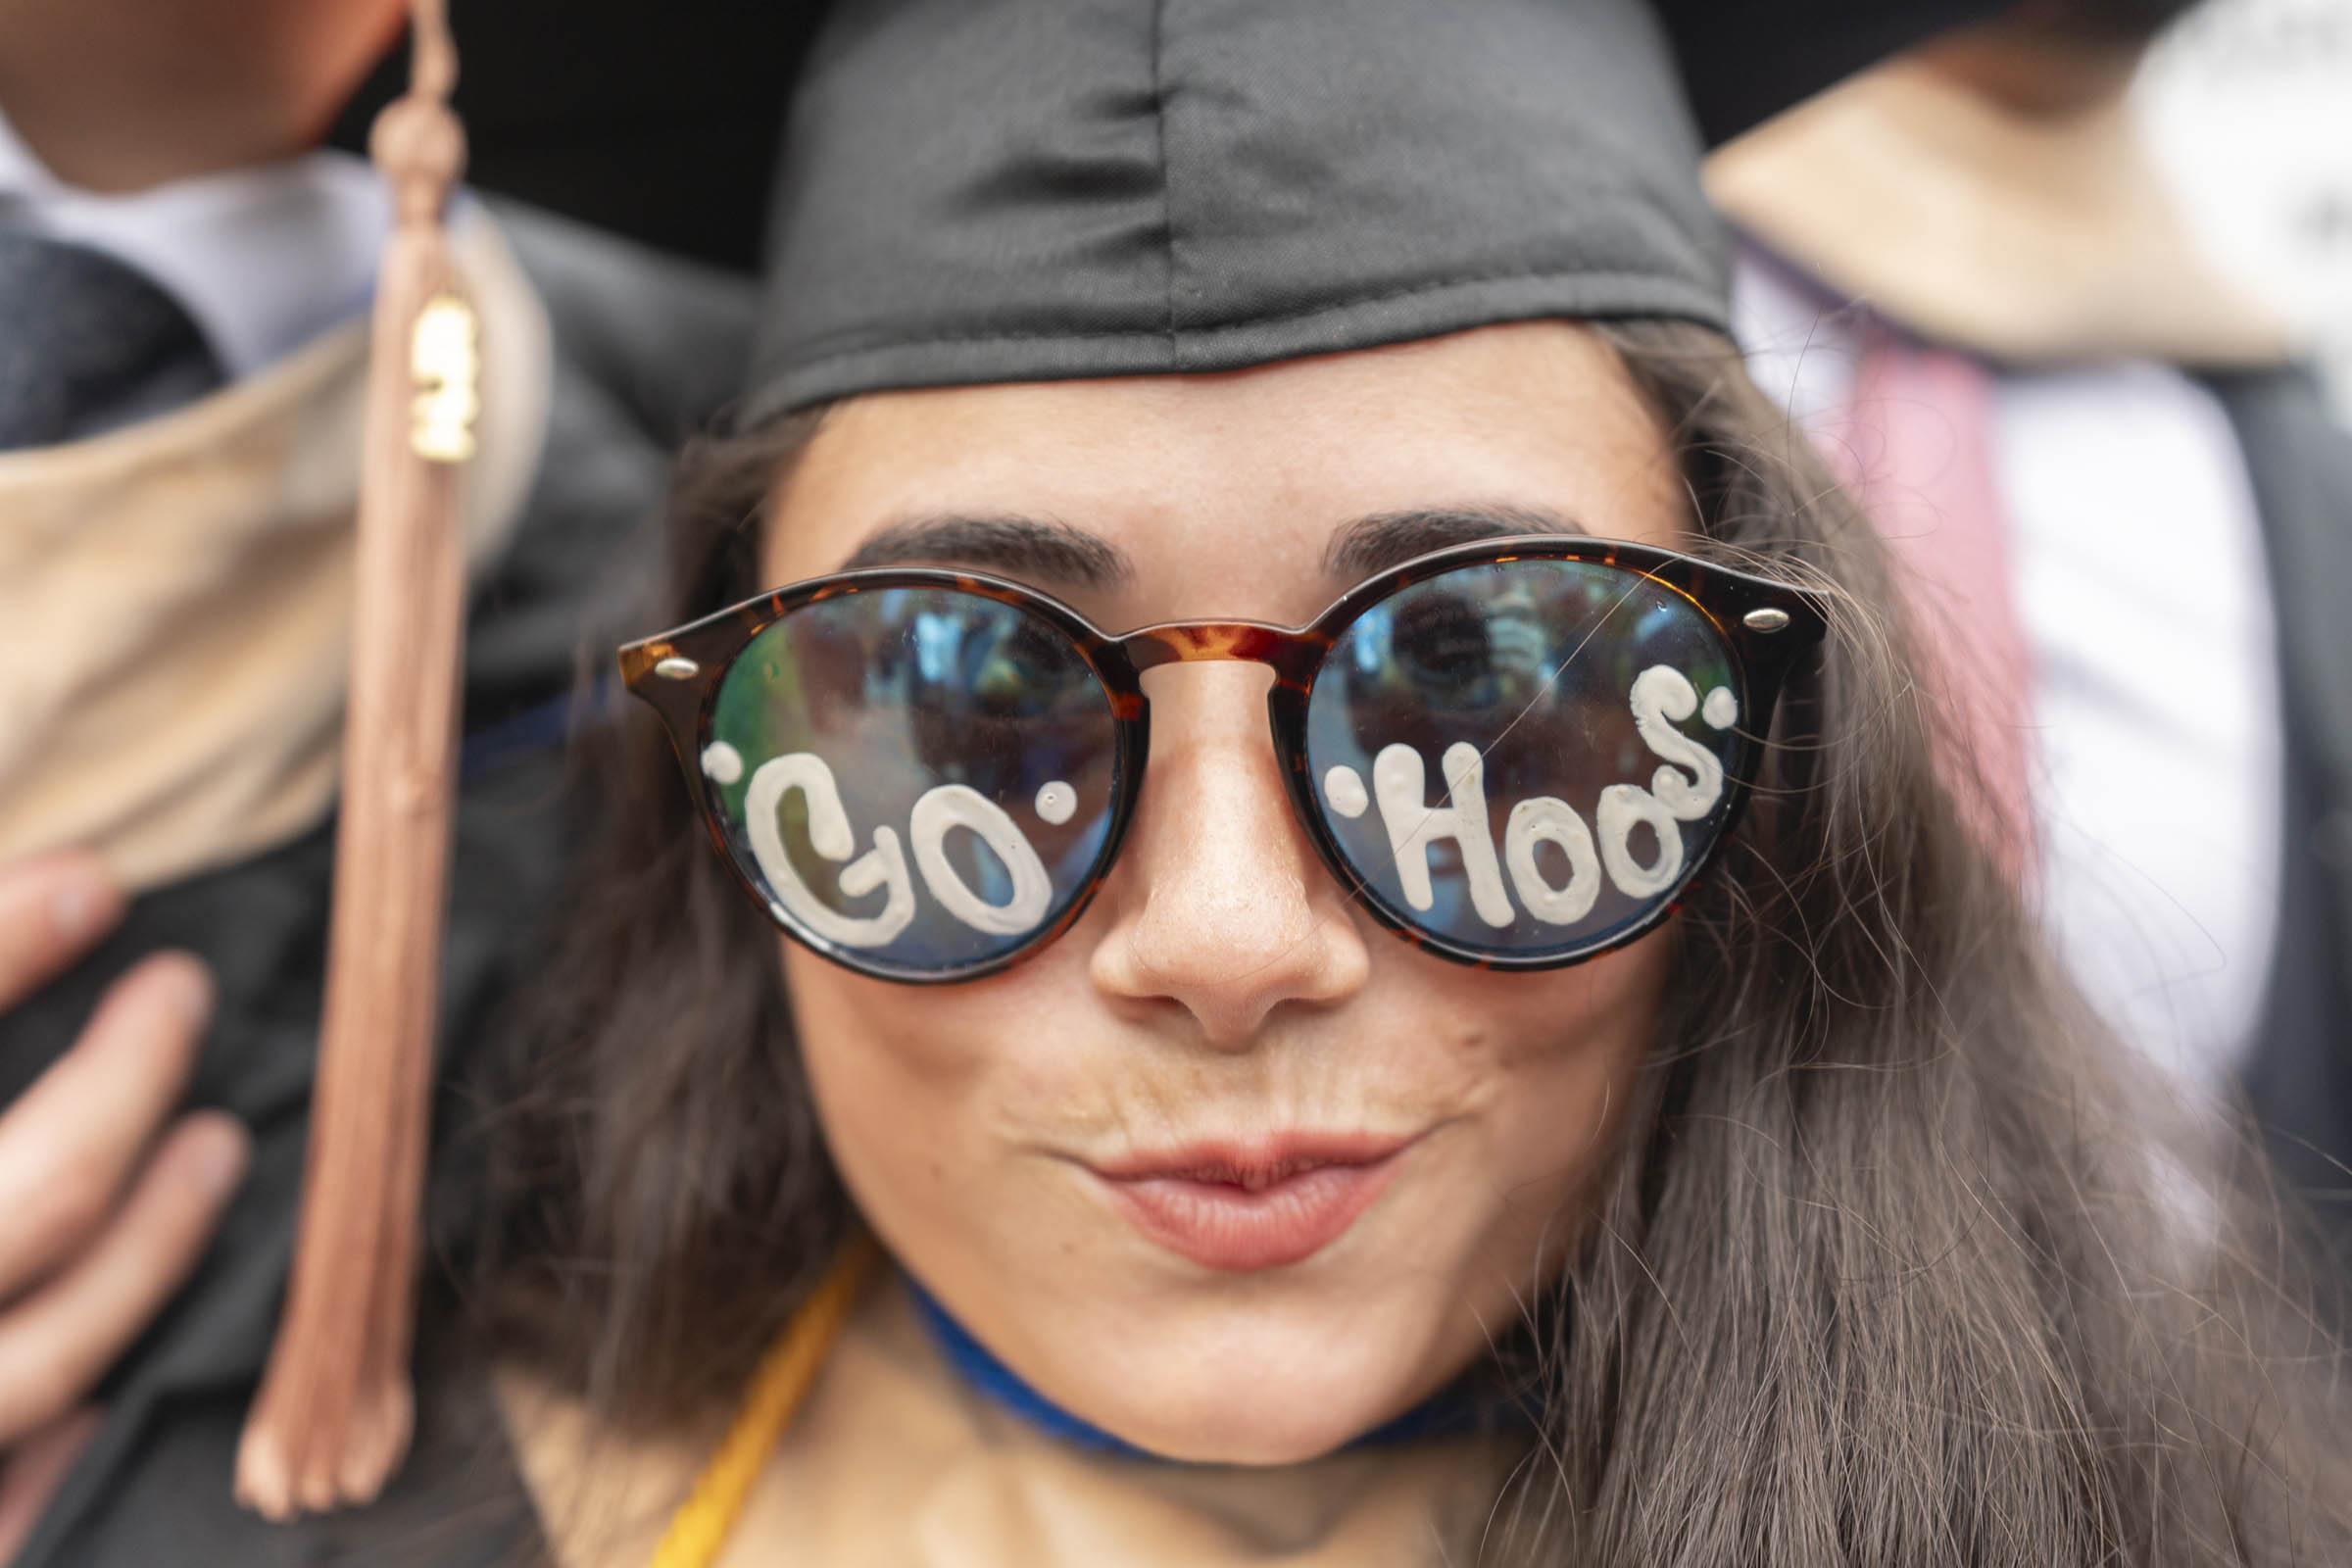 A student wears glasses with "Go Hoos" written on the lenses